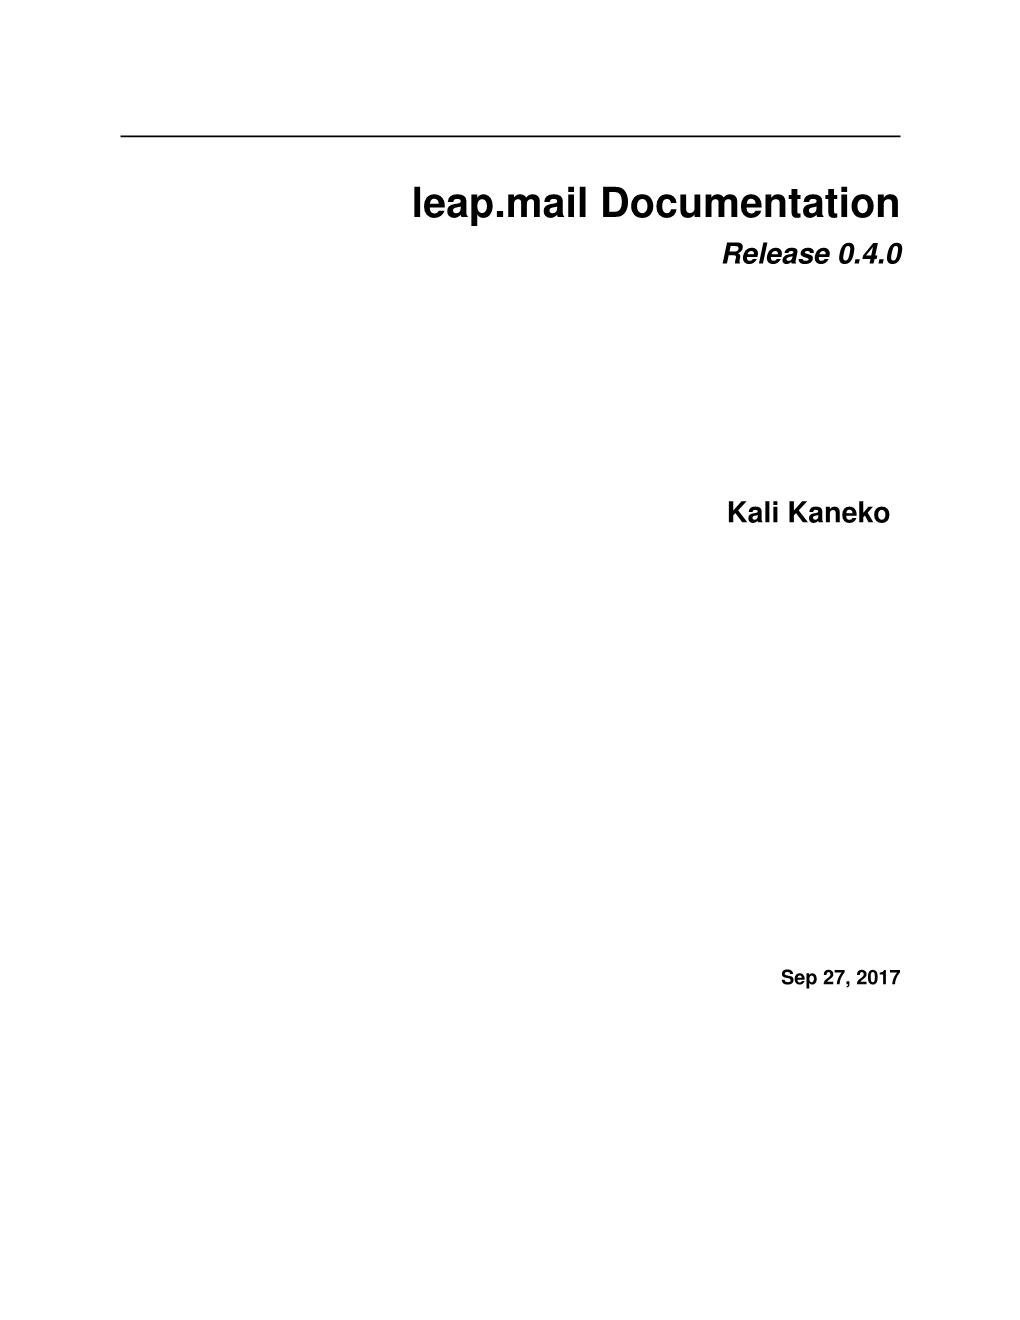 Leap.Mail Documentation Release 0.4.0